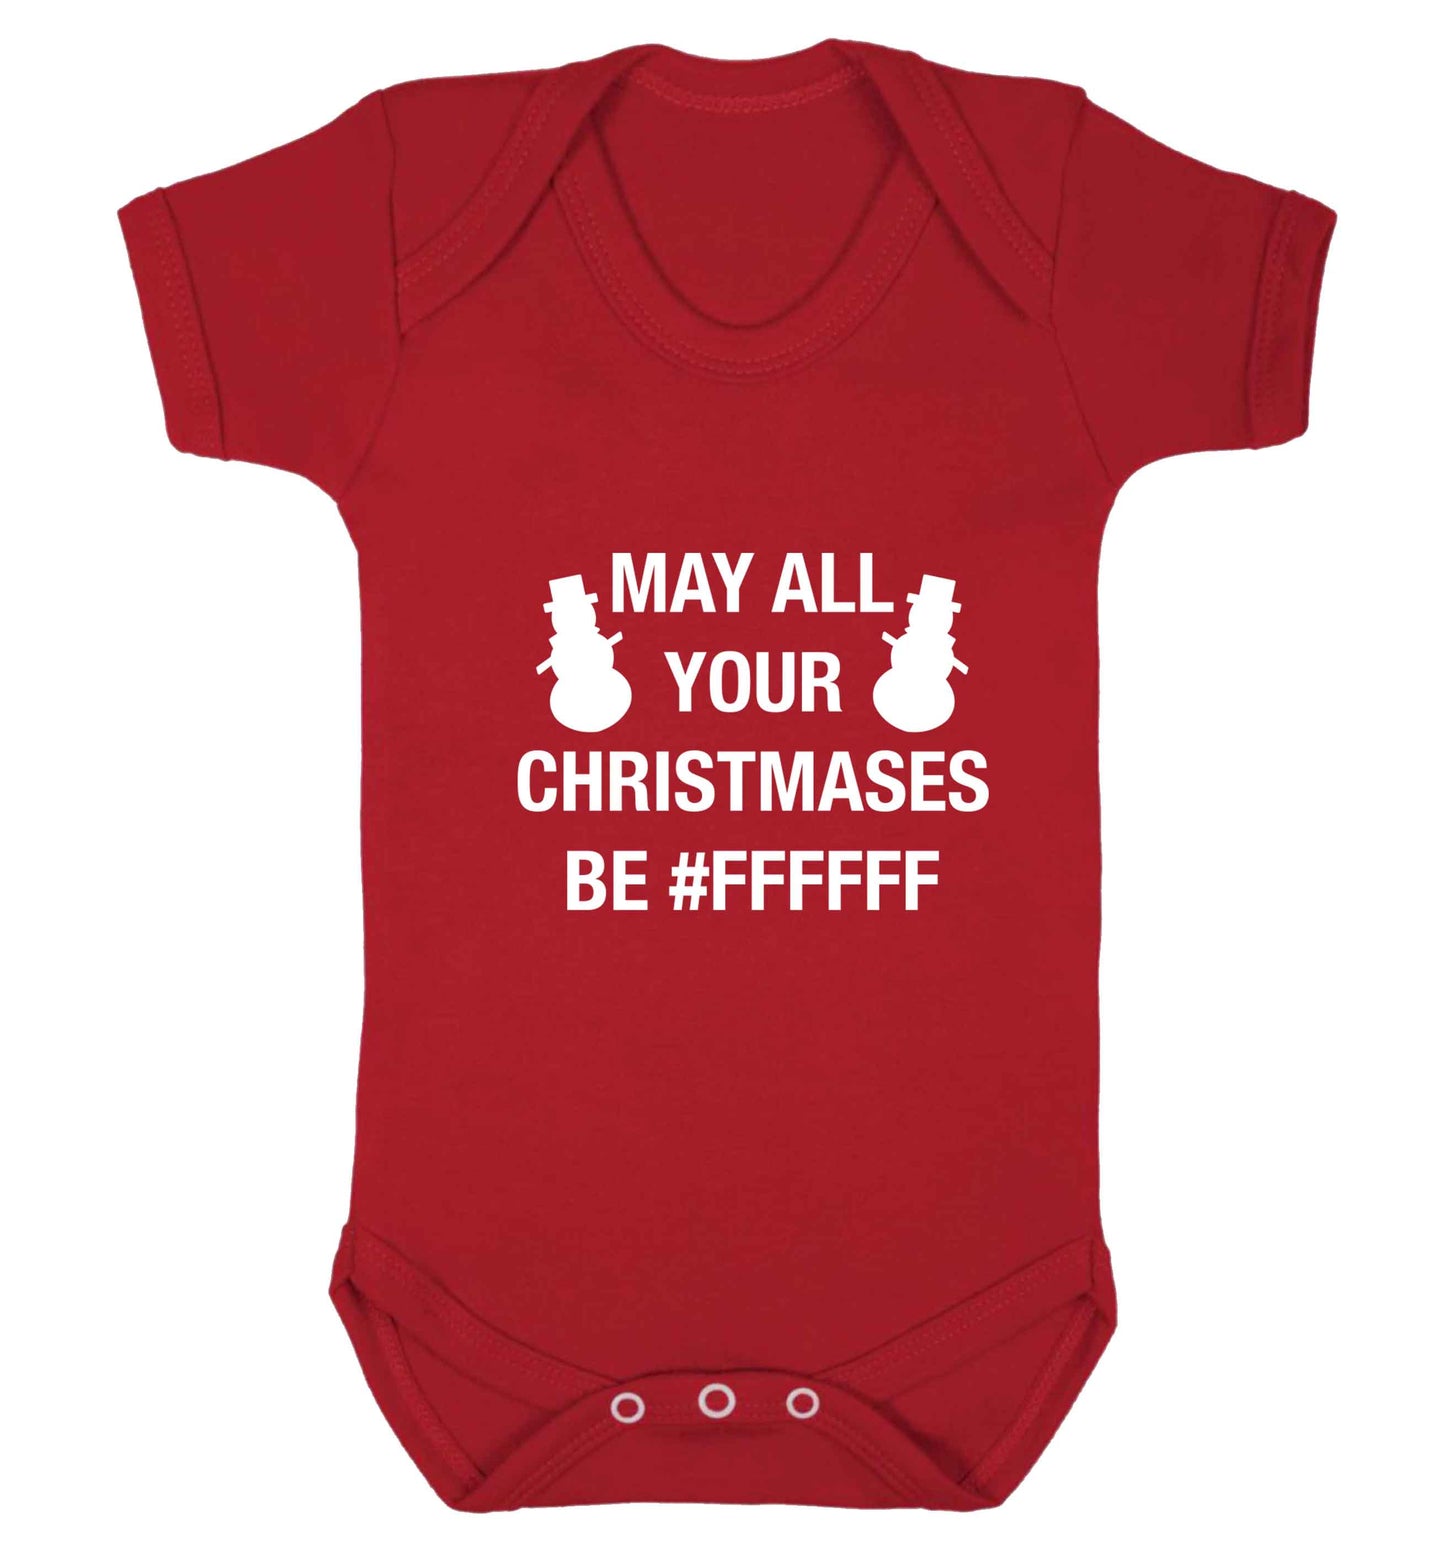 May all your Christmases be #FFFFFF baby vest red 18-24 months